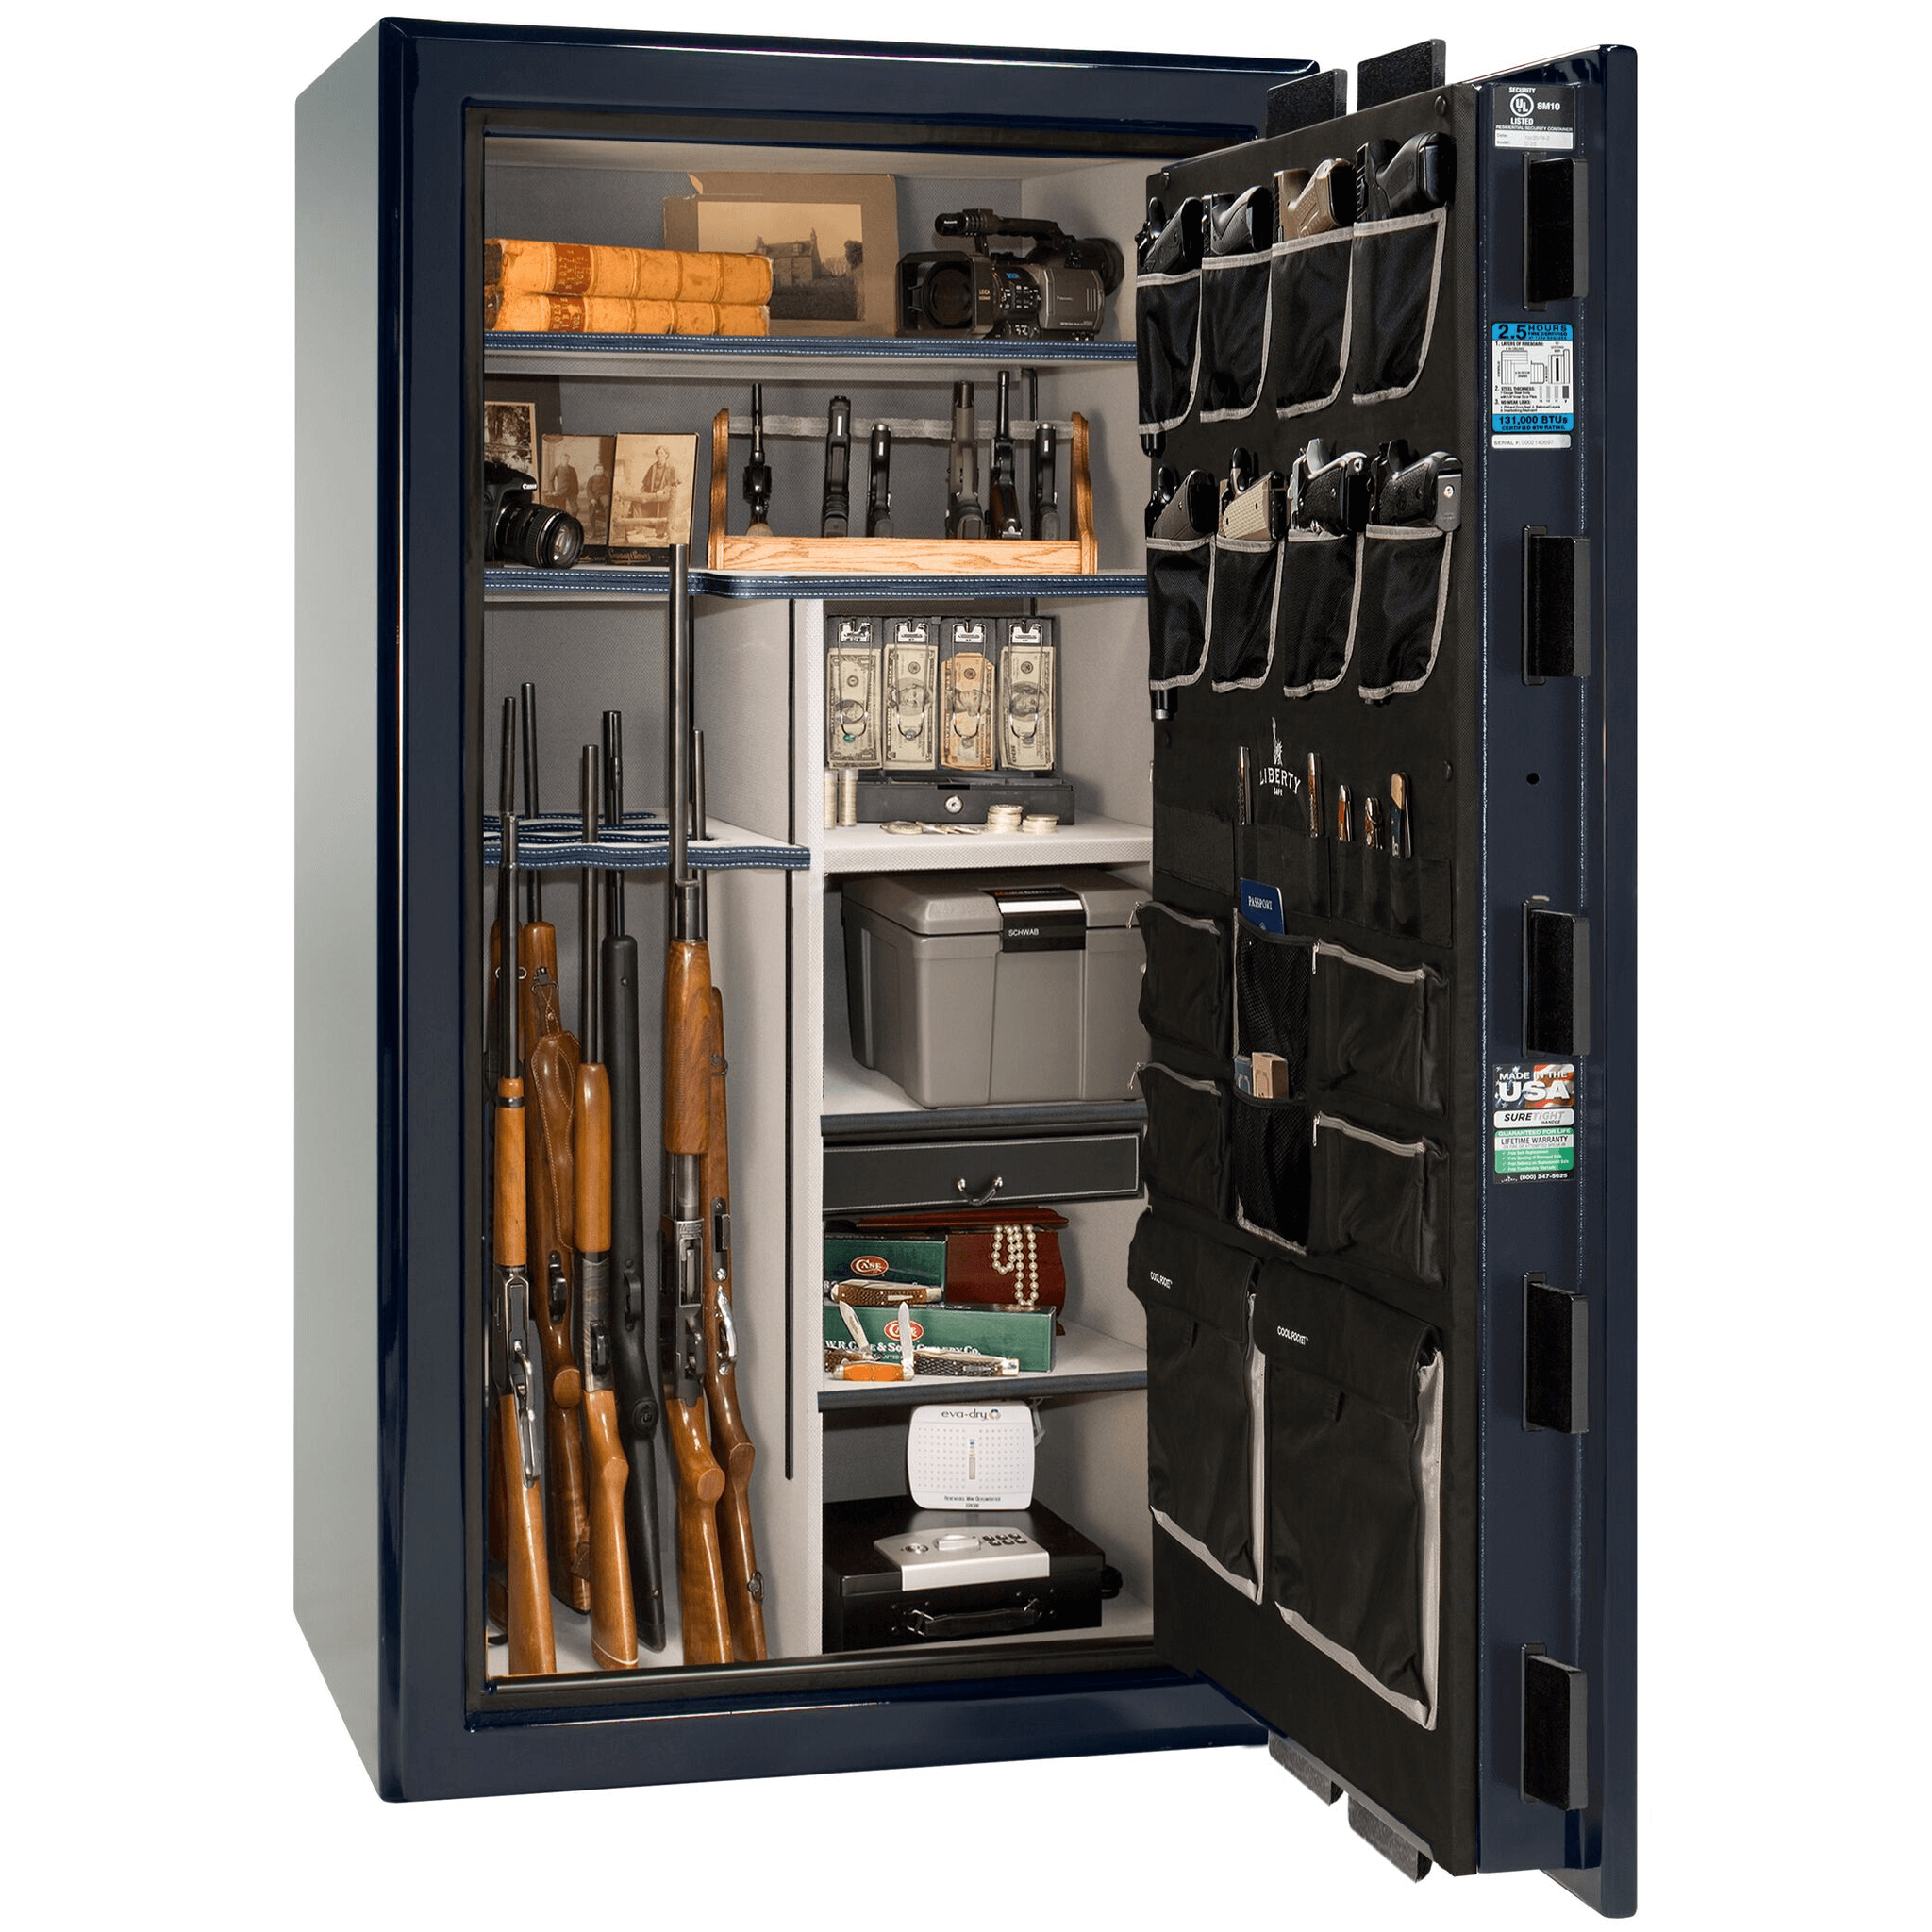 Presidential Series | Level 8 Security | 2.5 Hours Fire Protection | 40 | Dimensions: 66.5"(H) x 36.25"(W) x 32"(D) | Blue Gloss | Chrome Hardware | Electronic Lock